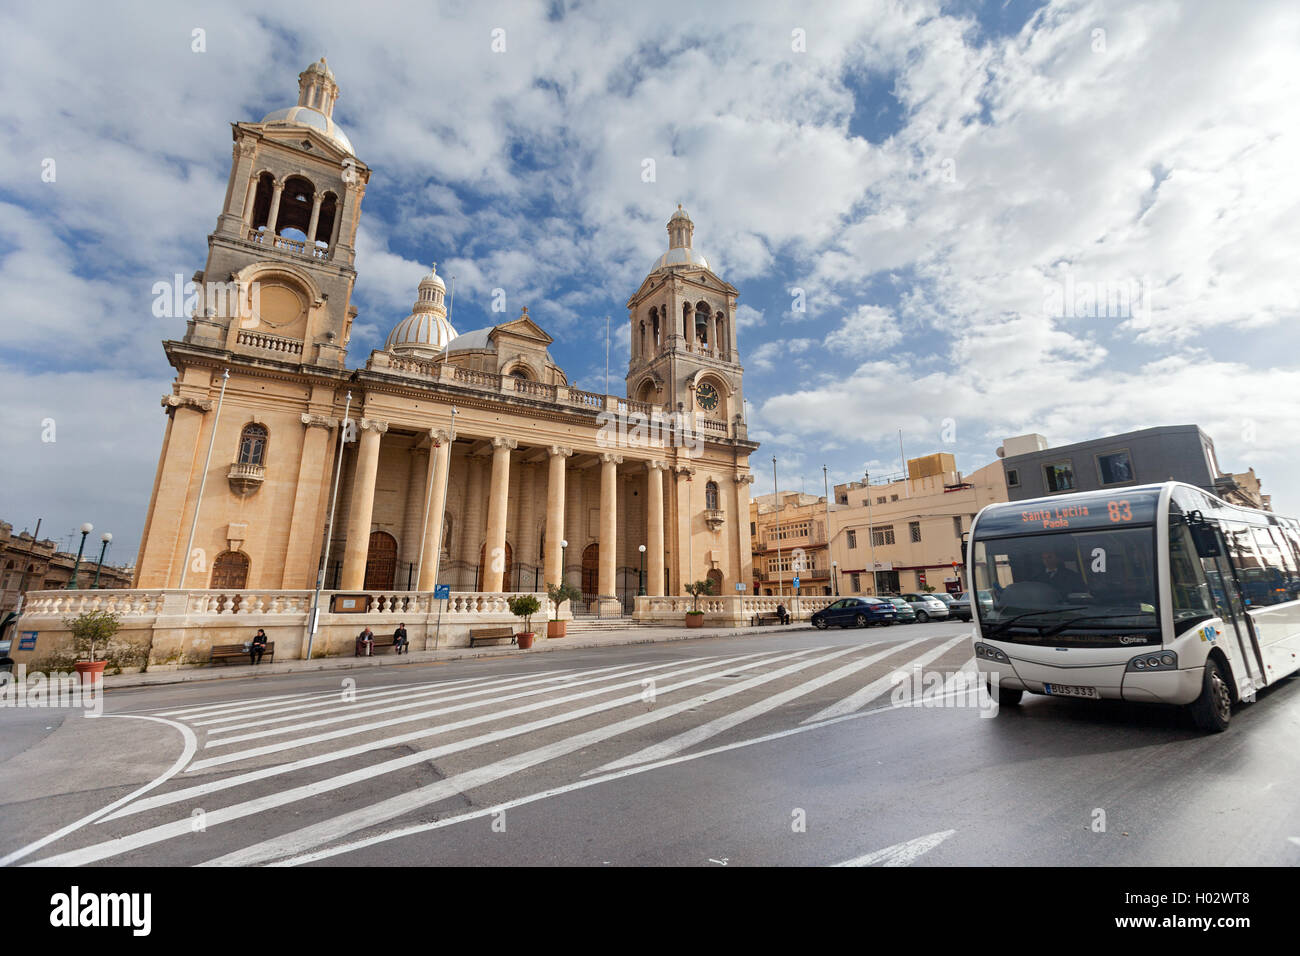 PAOLA, MALTA - JANUARY 12, 2015: Public bus in front of Church of Christ the King. Stock Photo